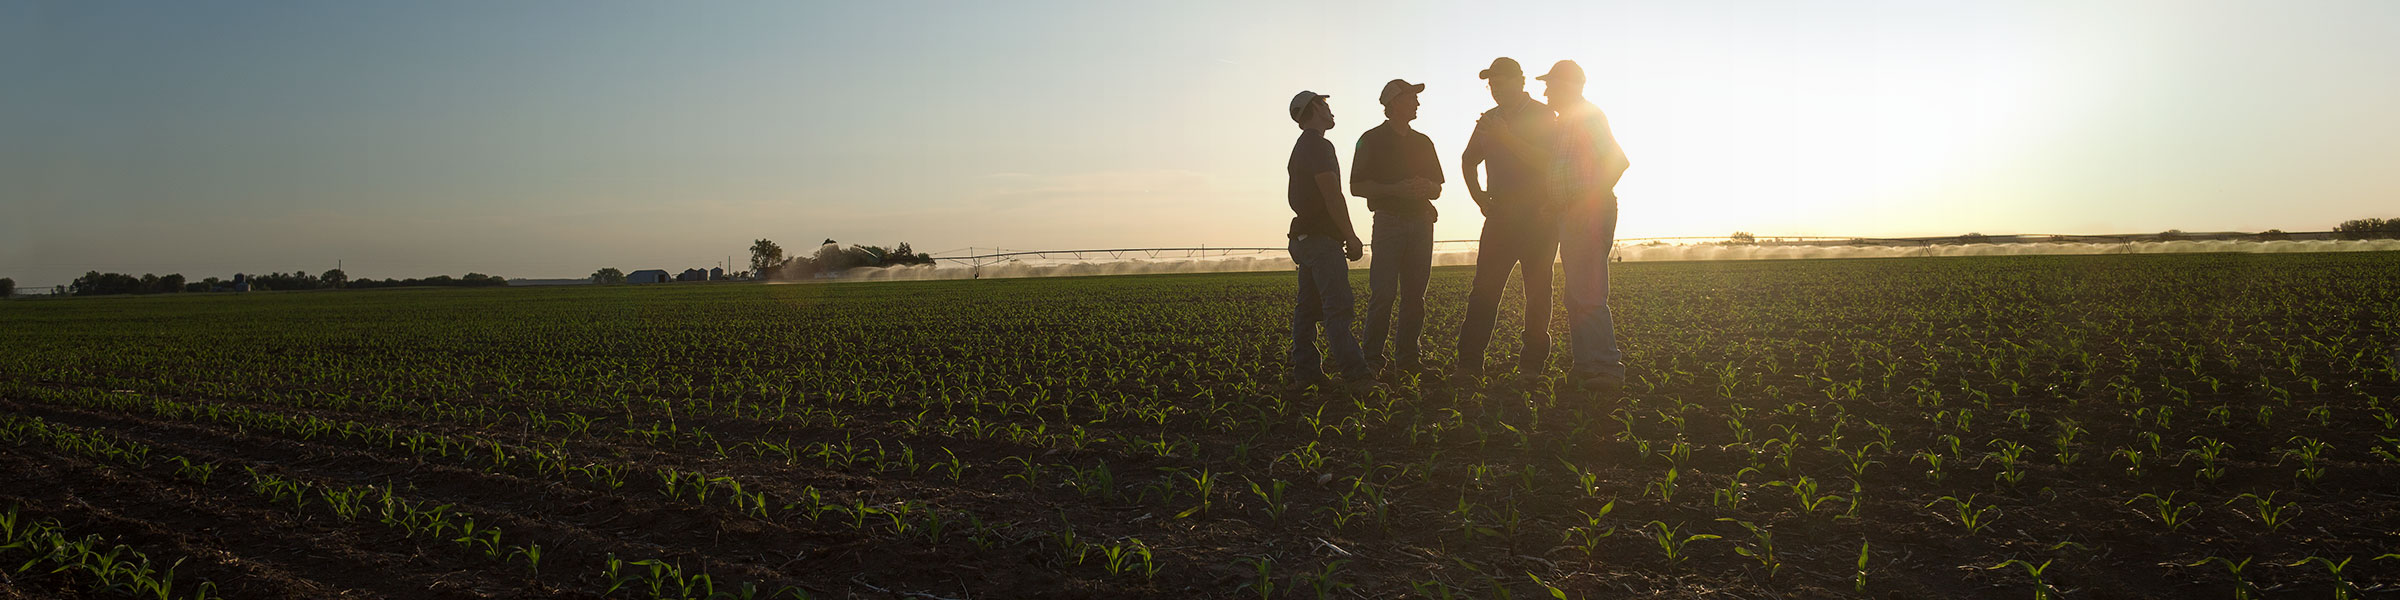 Four men standing in a field during sunset